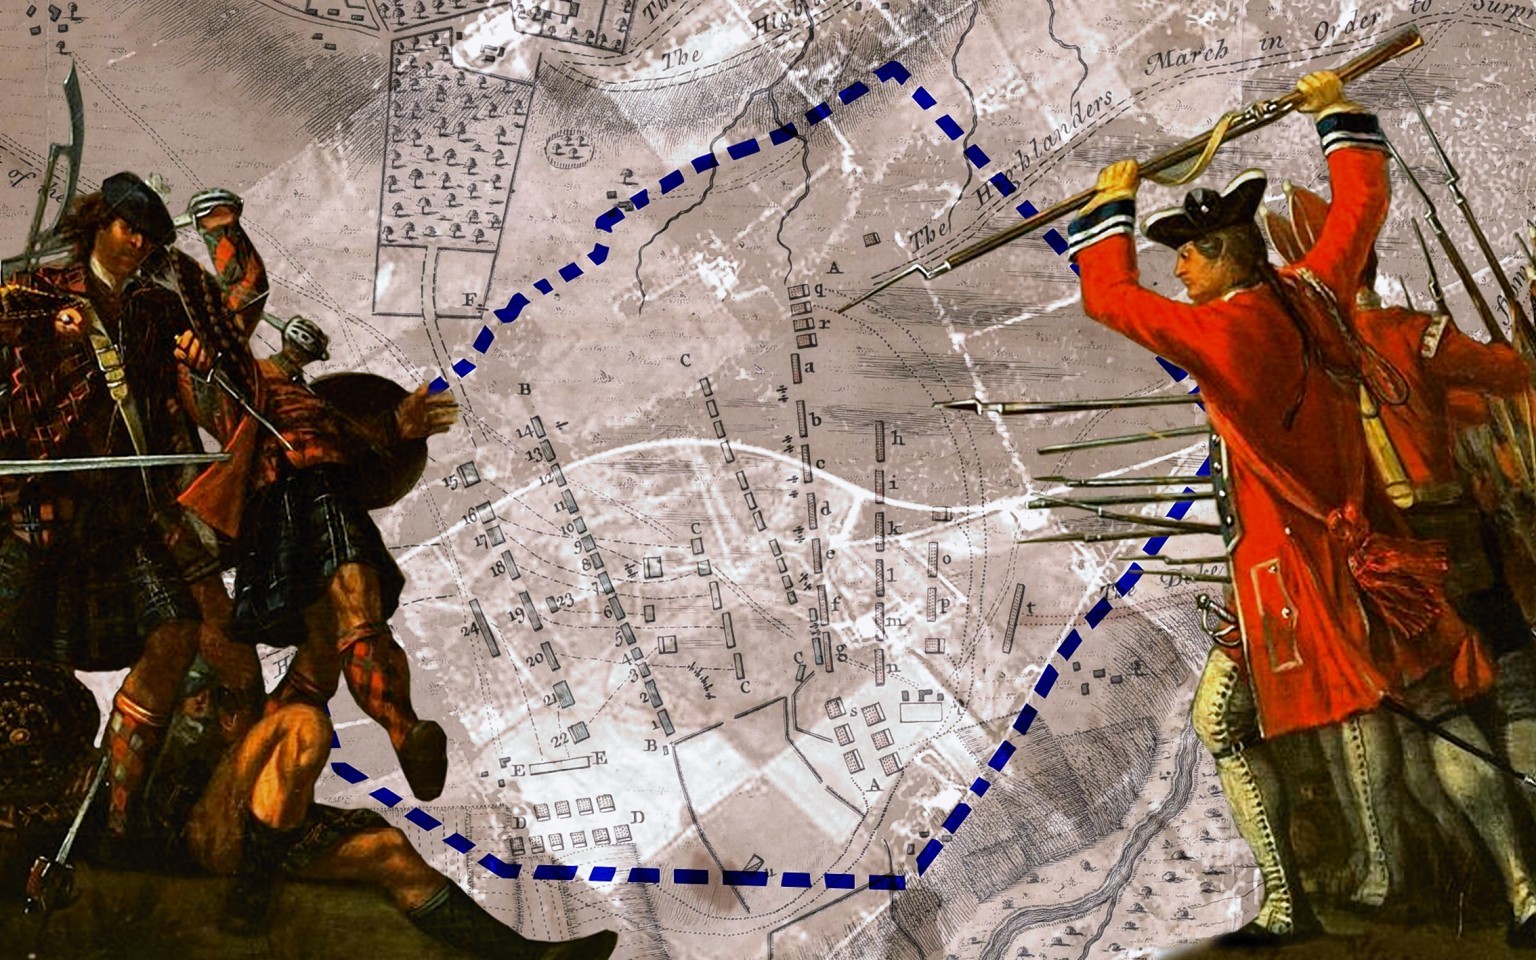 A rough map of the Culloden battlefield site with a blue marker showing the current conservation line.